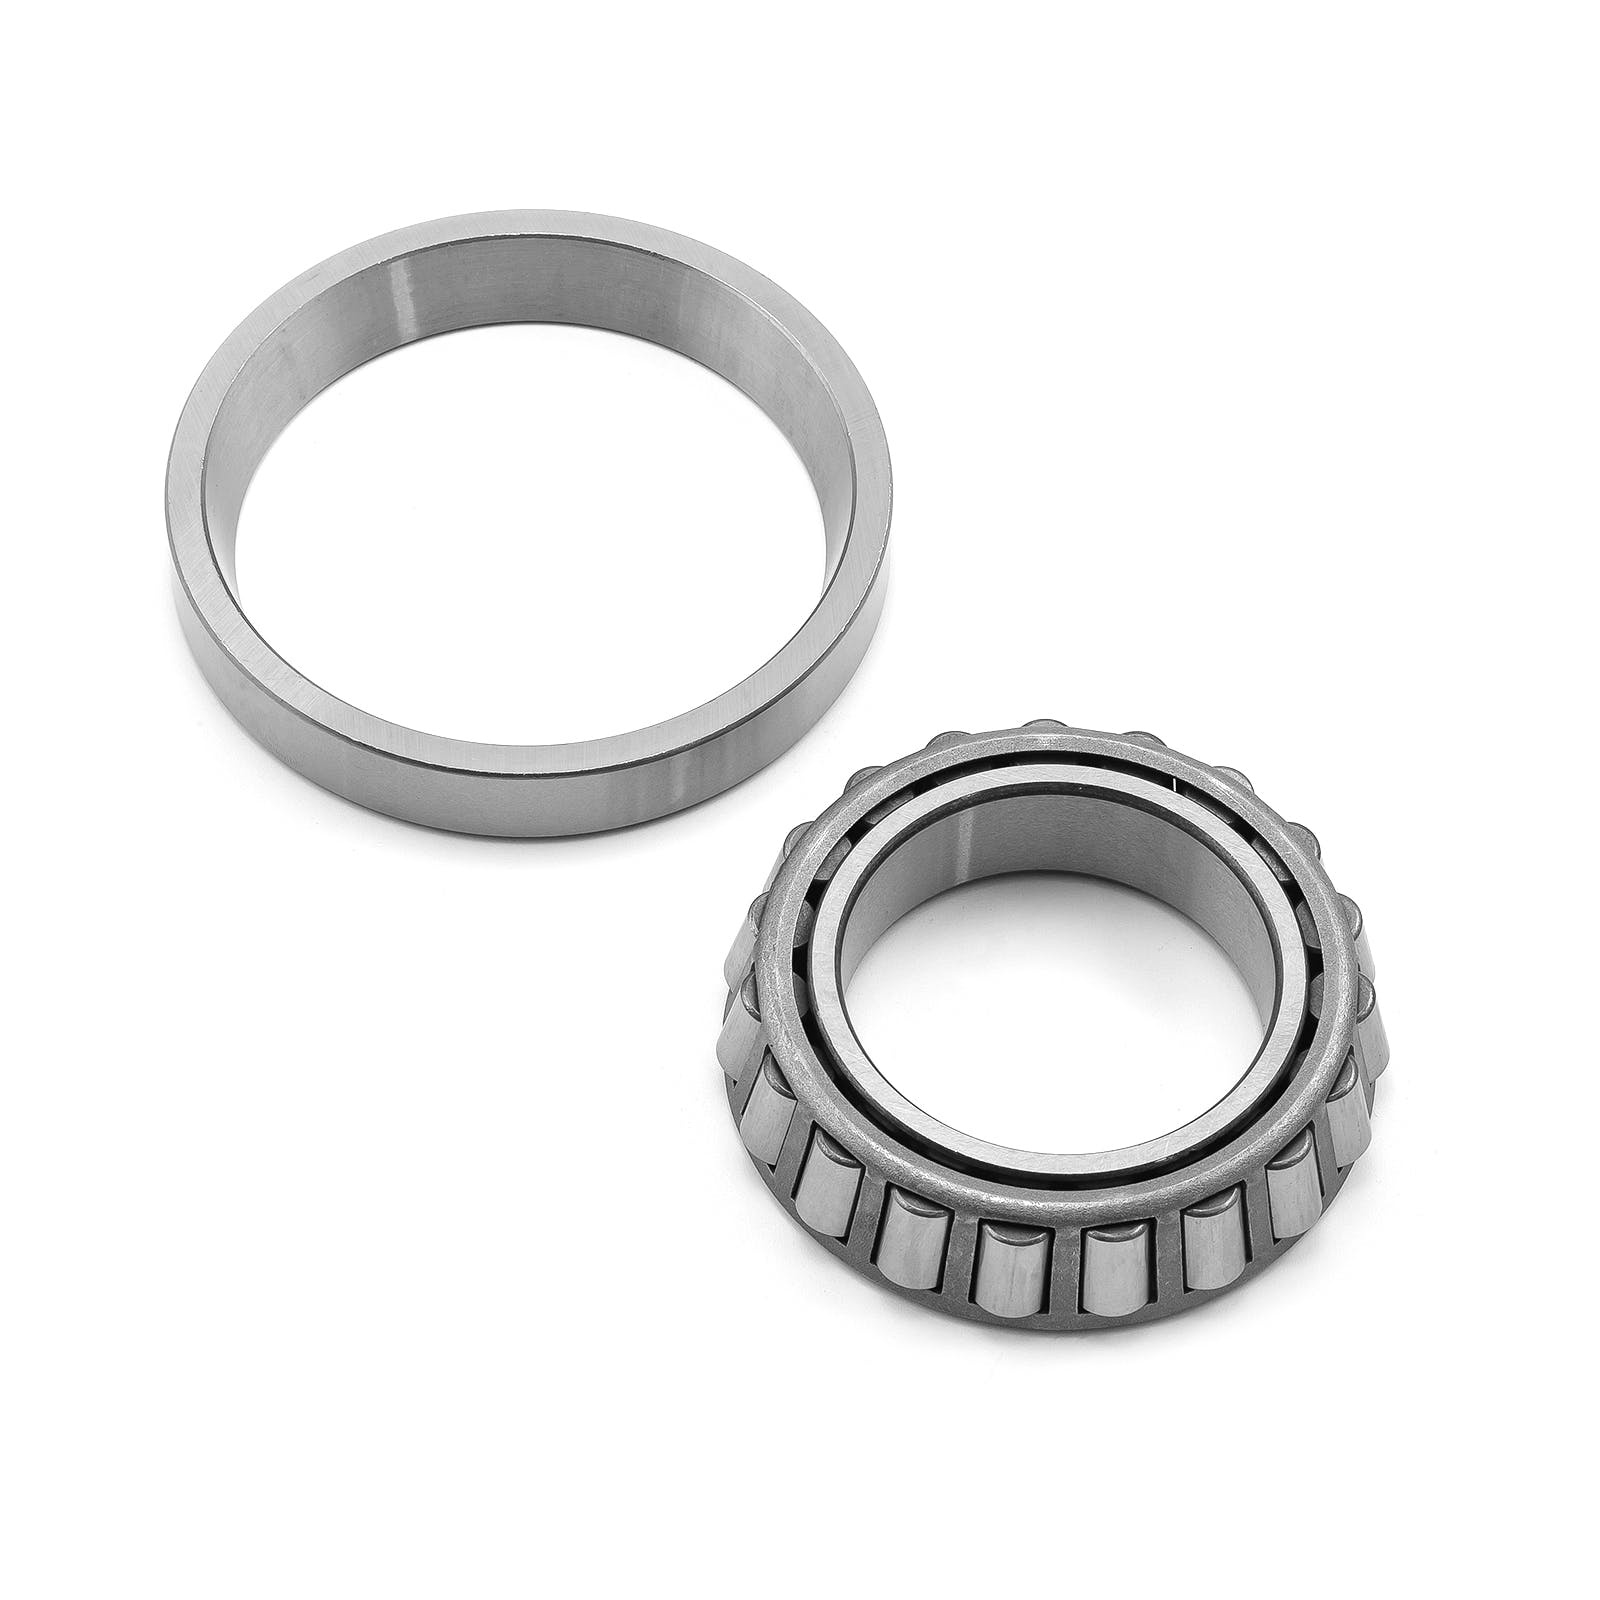 Speedmaster PCE203.1007 9 Carrier Bearing w/ 2.25 Journal  to suit 4.00 Case